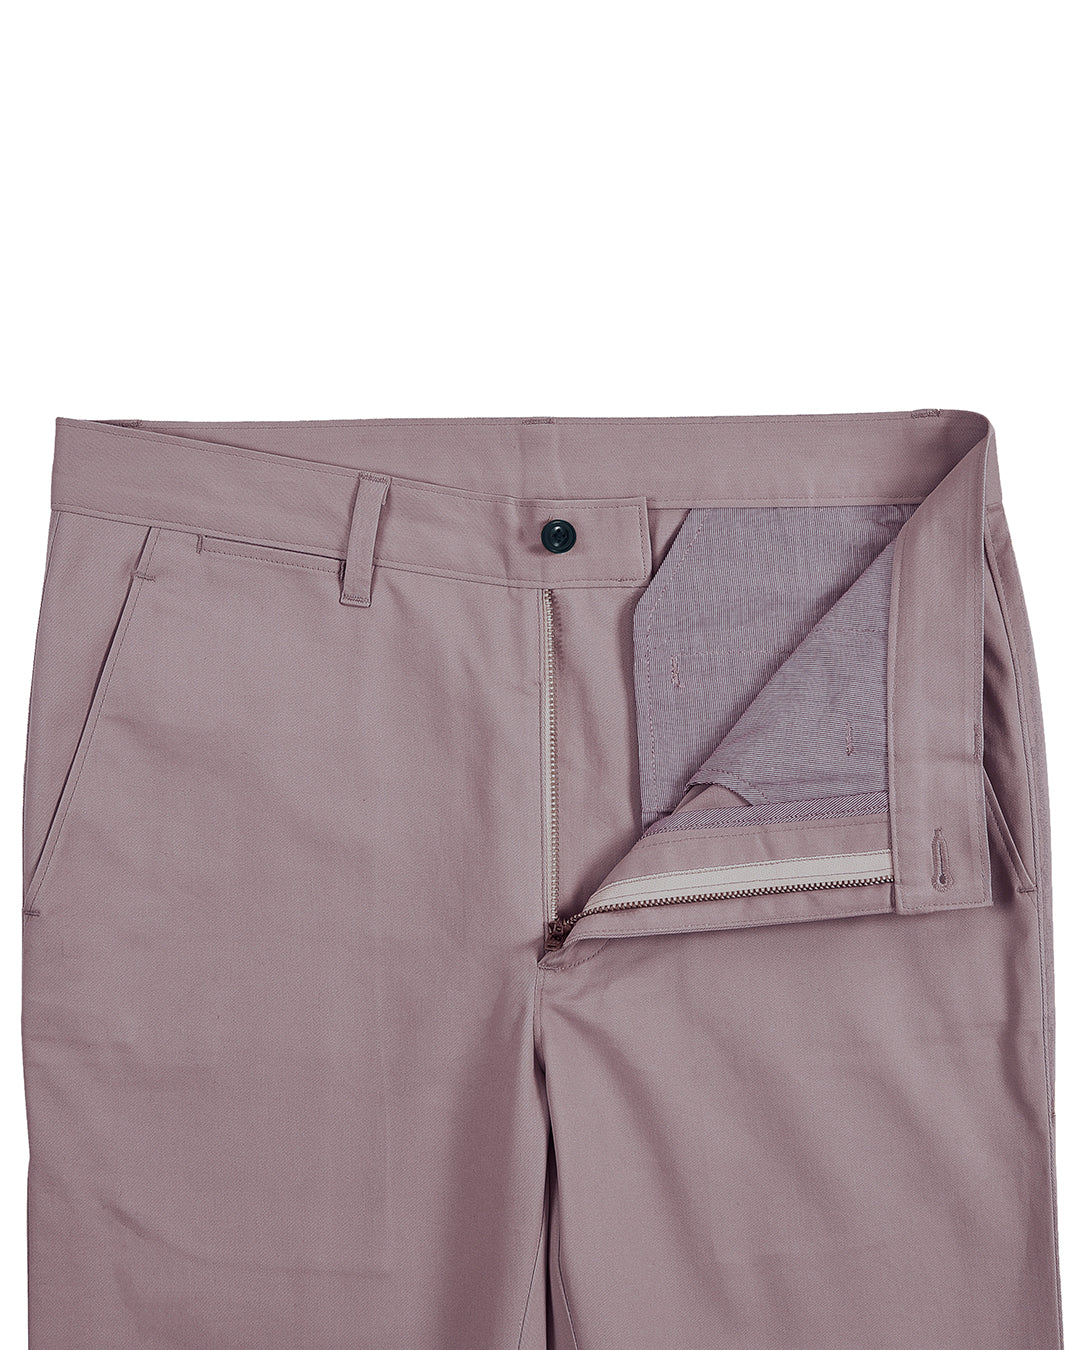 Front open view of custom Genoa Chino pants for men by Luxire in purple fade